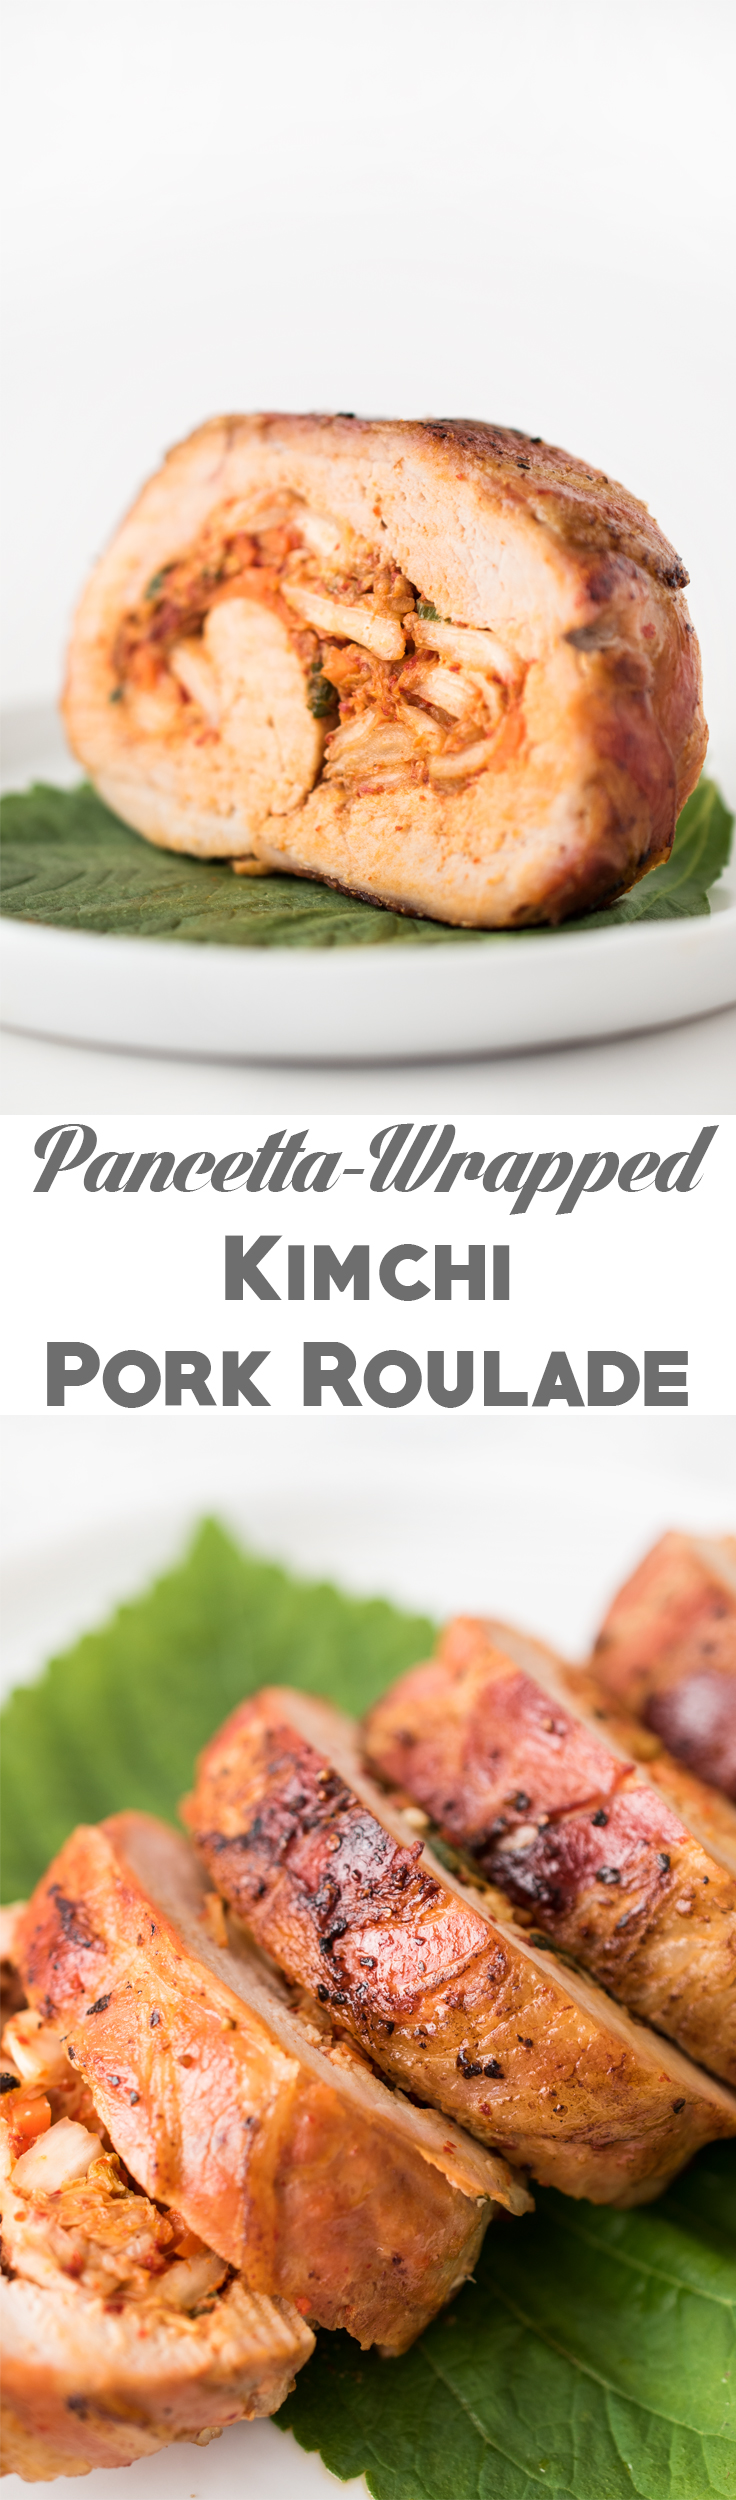 Pancetta-Wrapped Kimchi Pork Roulade - It's like Korean BBQ wrapped into one dish!